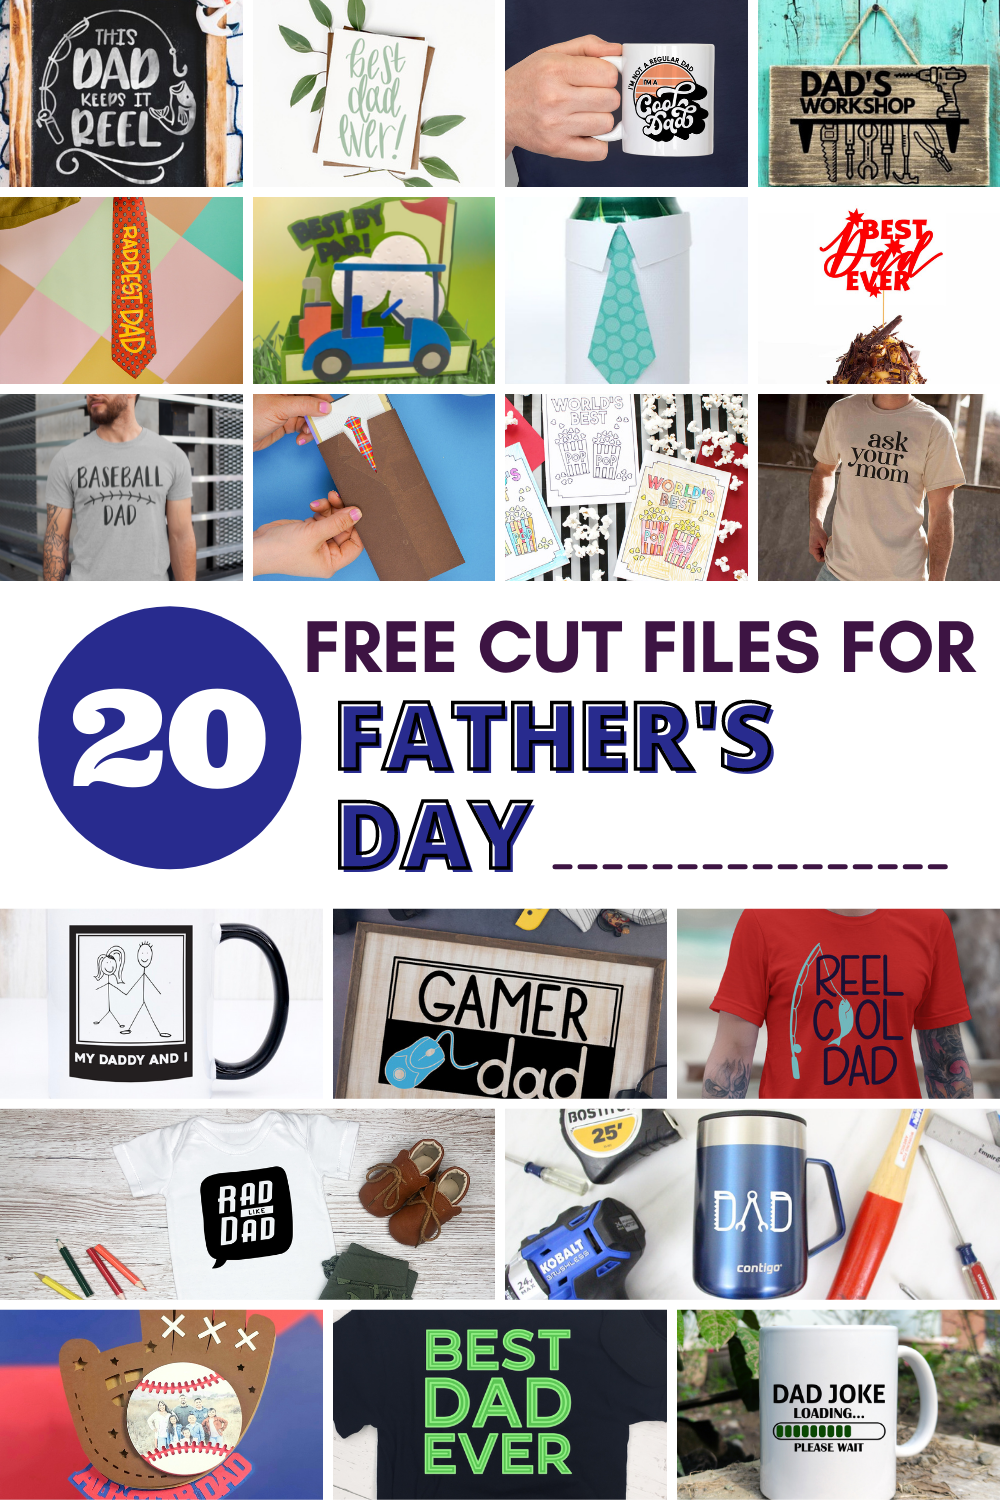 Get 20 free Father's Day cut files.